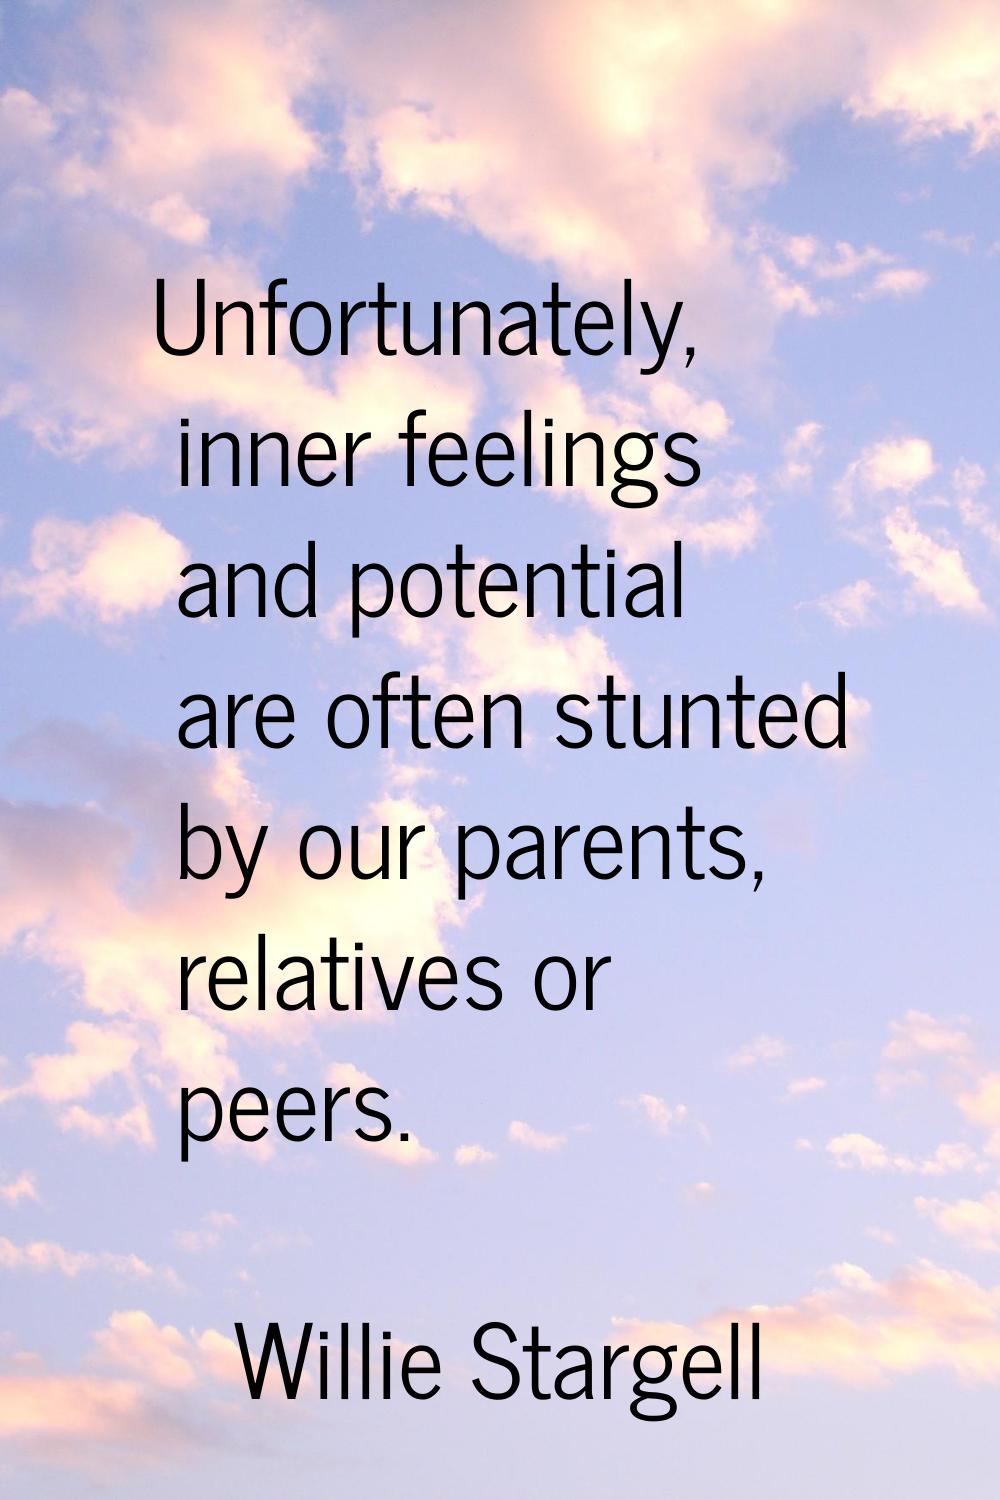 Unfortunately, inner feelings and potential are often stunted by our parents, relatives or peers.